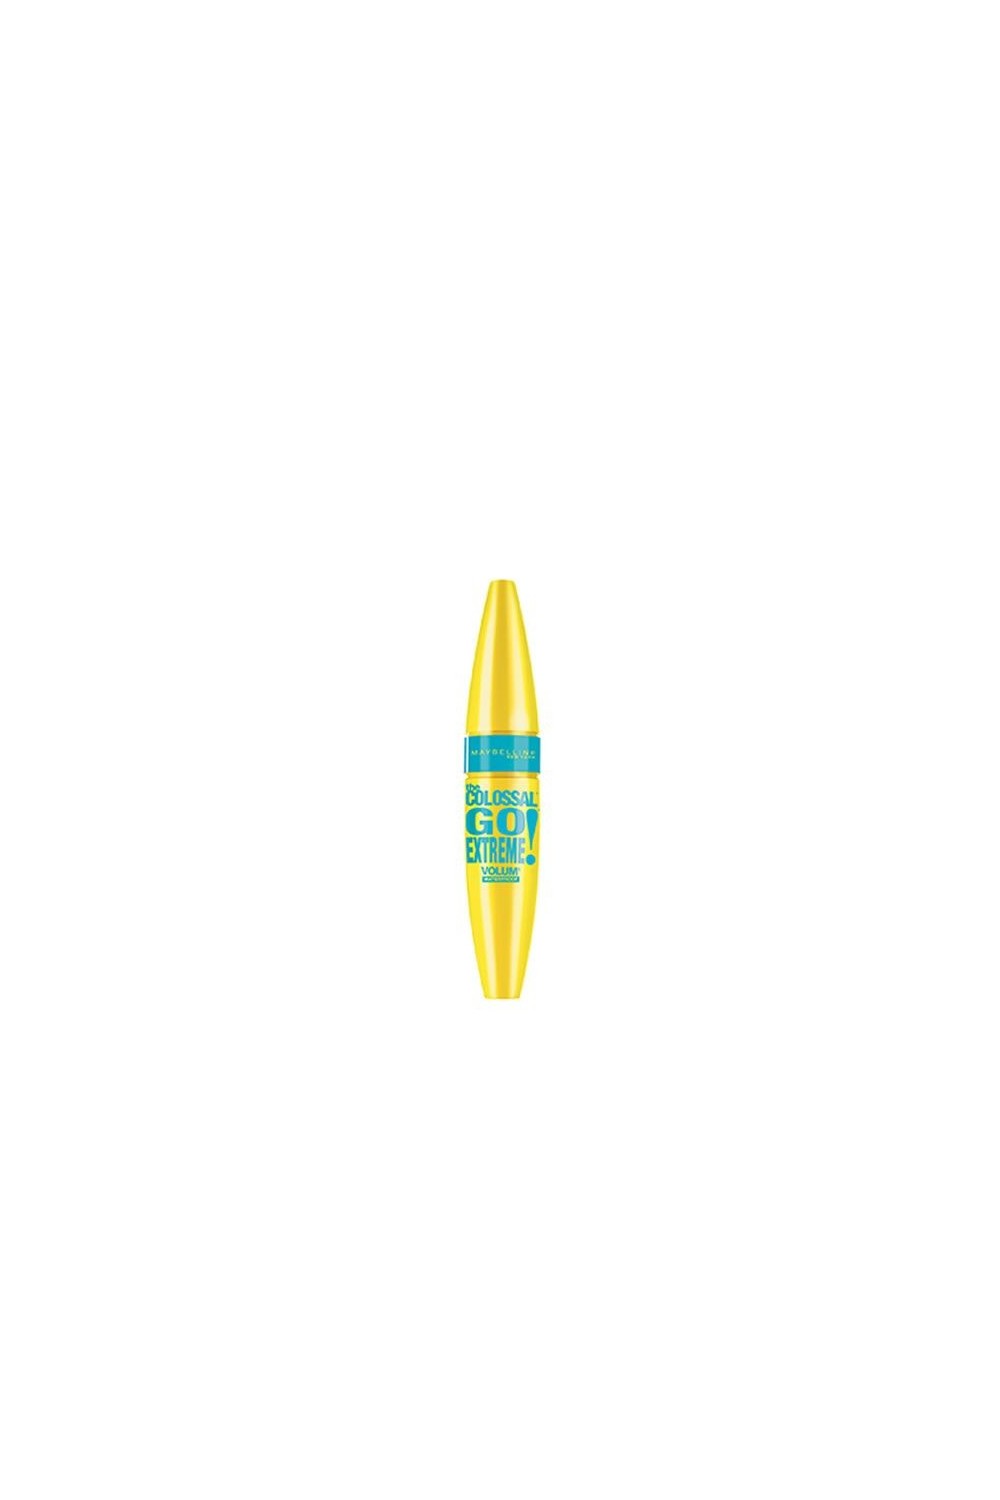 Maybelline The Colossal Go Extreme Waterproof Mascara 9,5ml